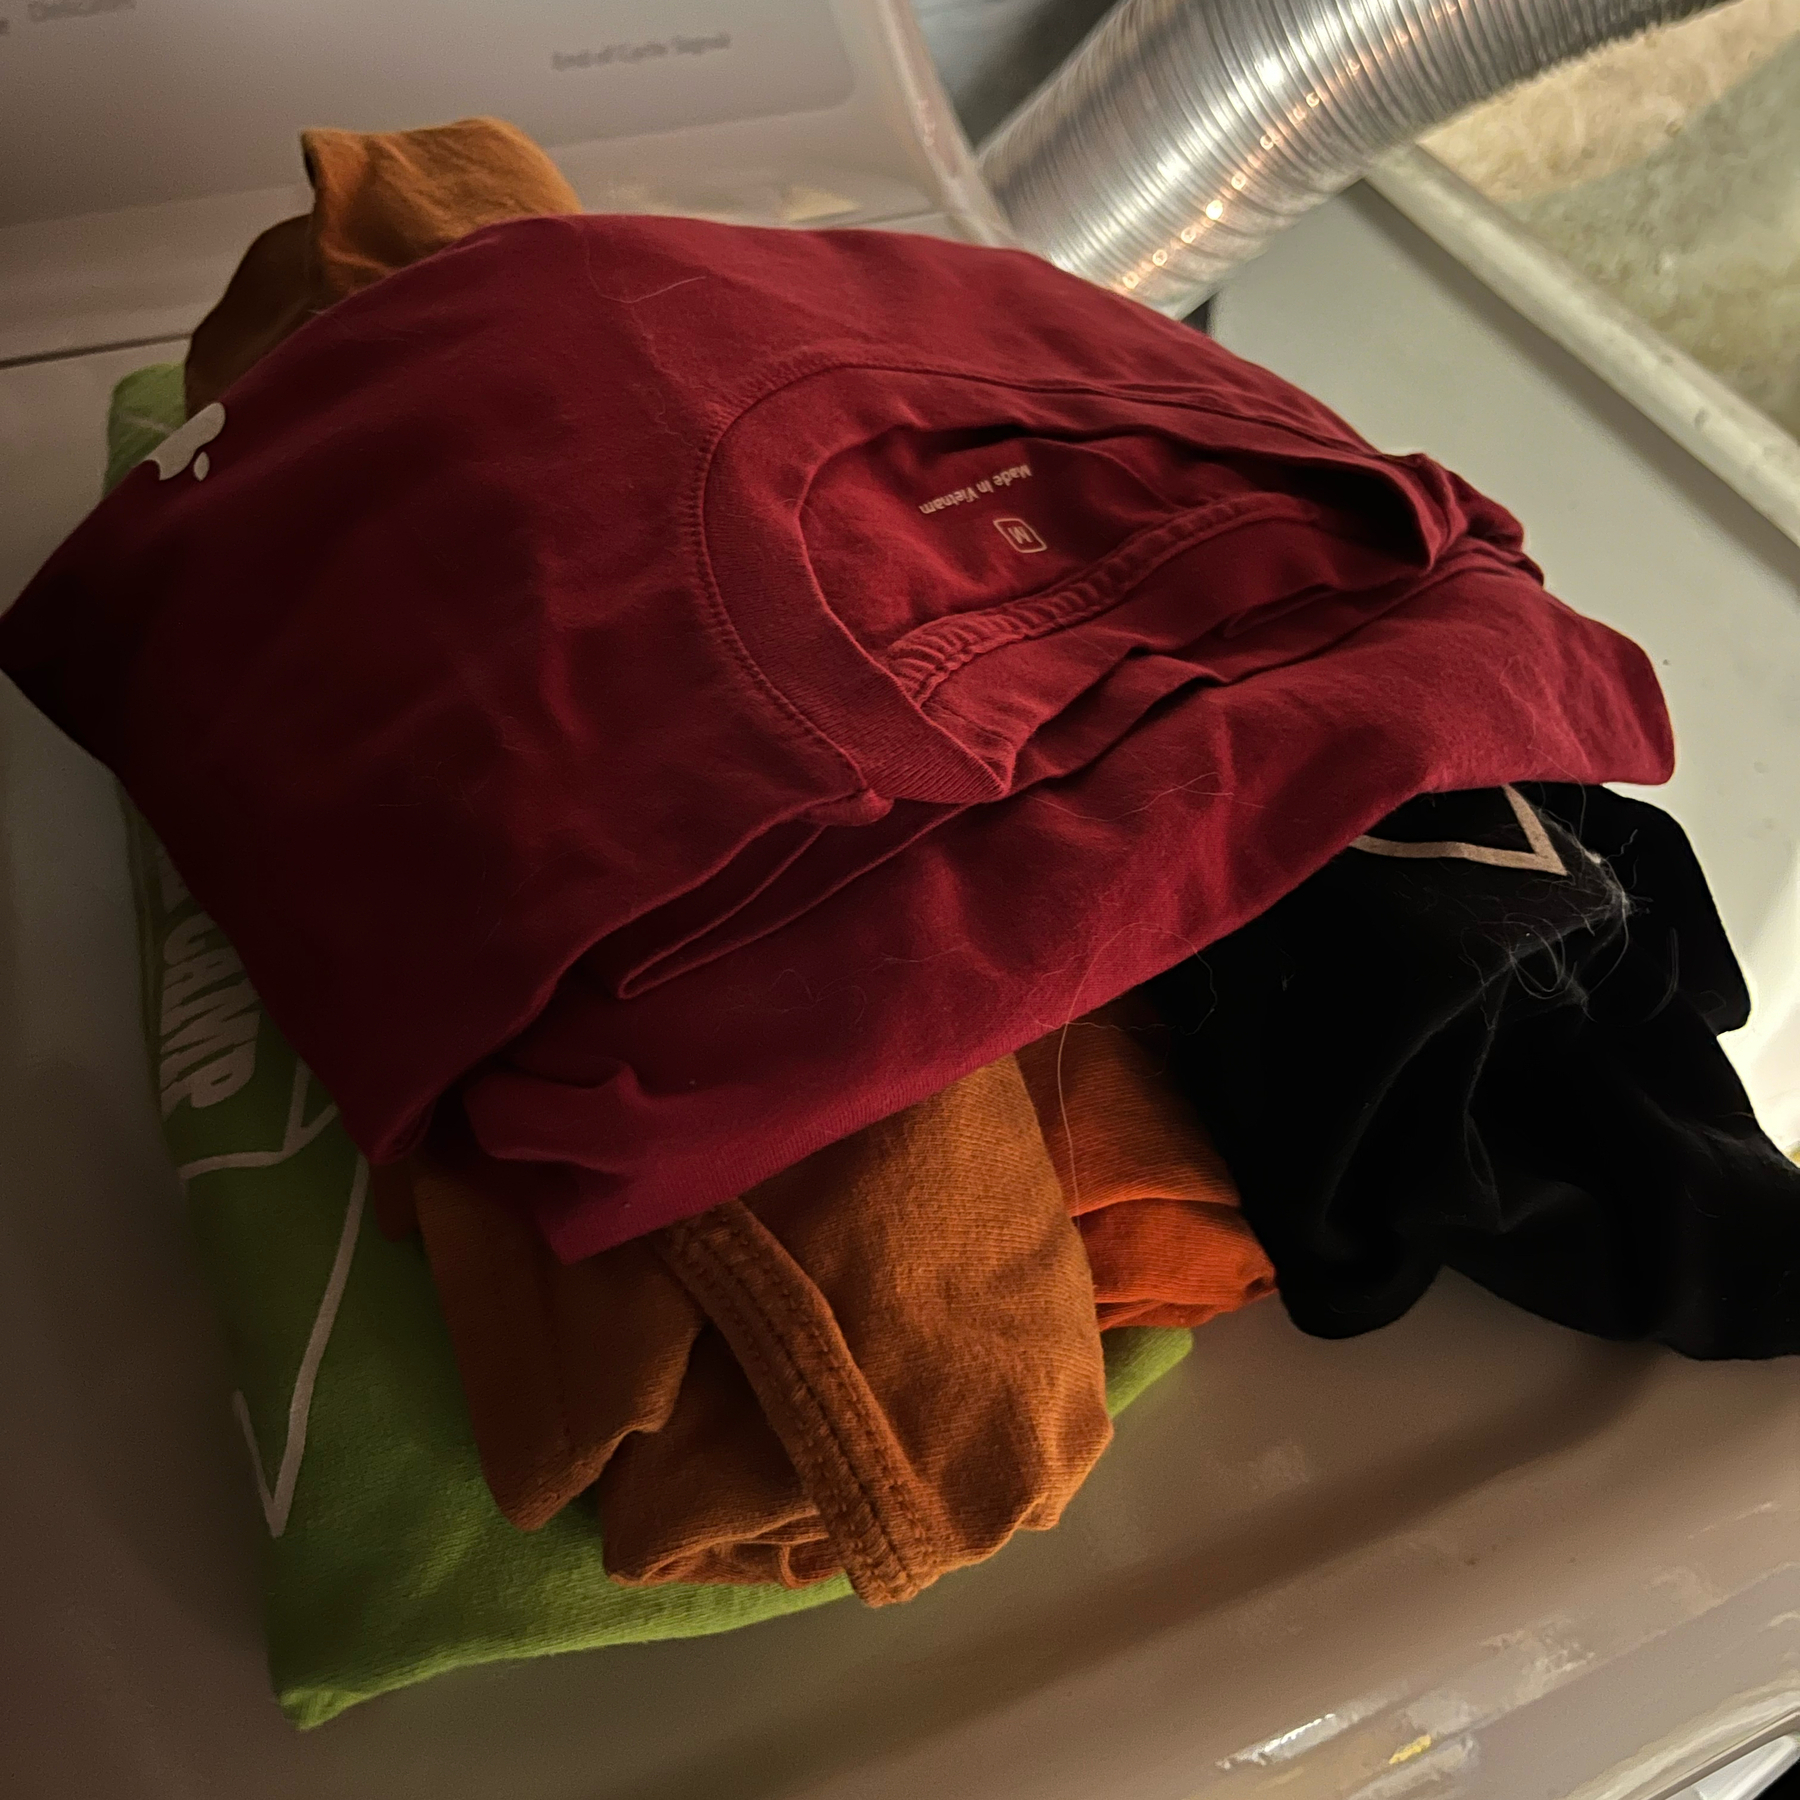 Various colored t-shirts in a pile on the dryer.